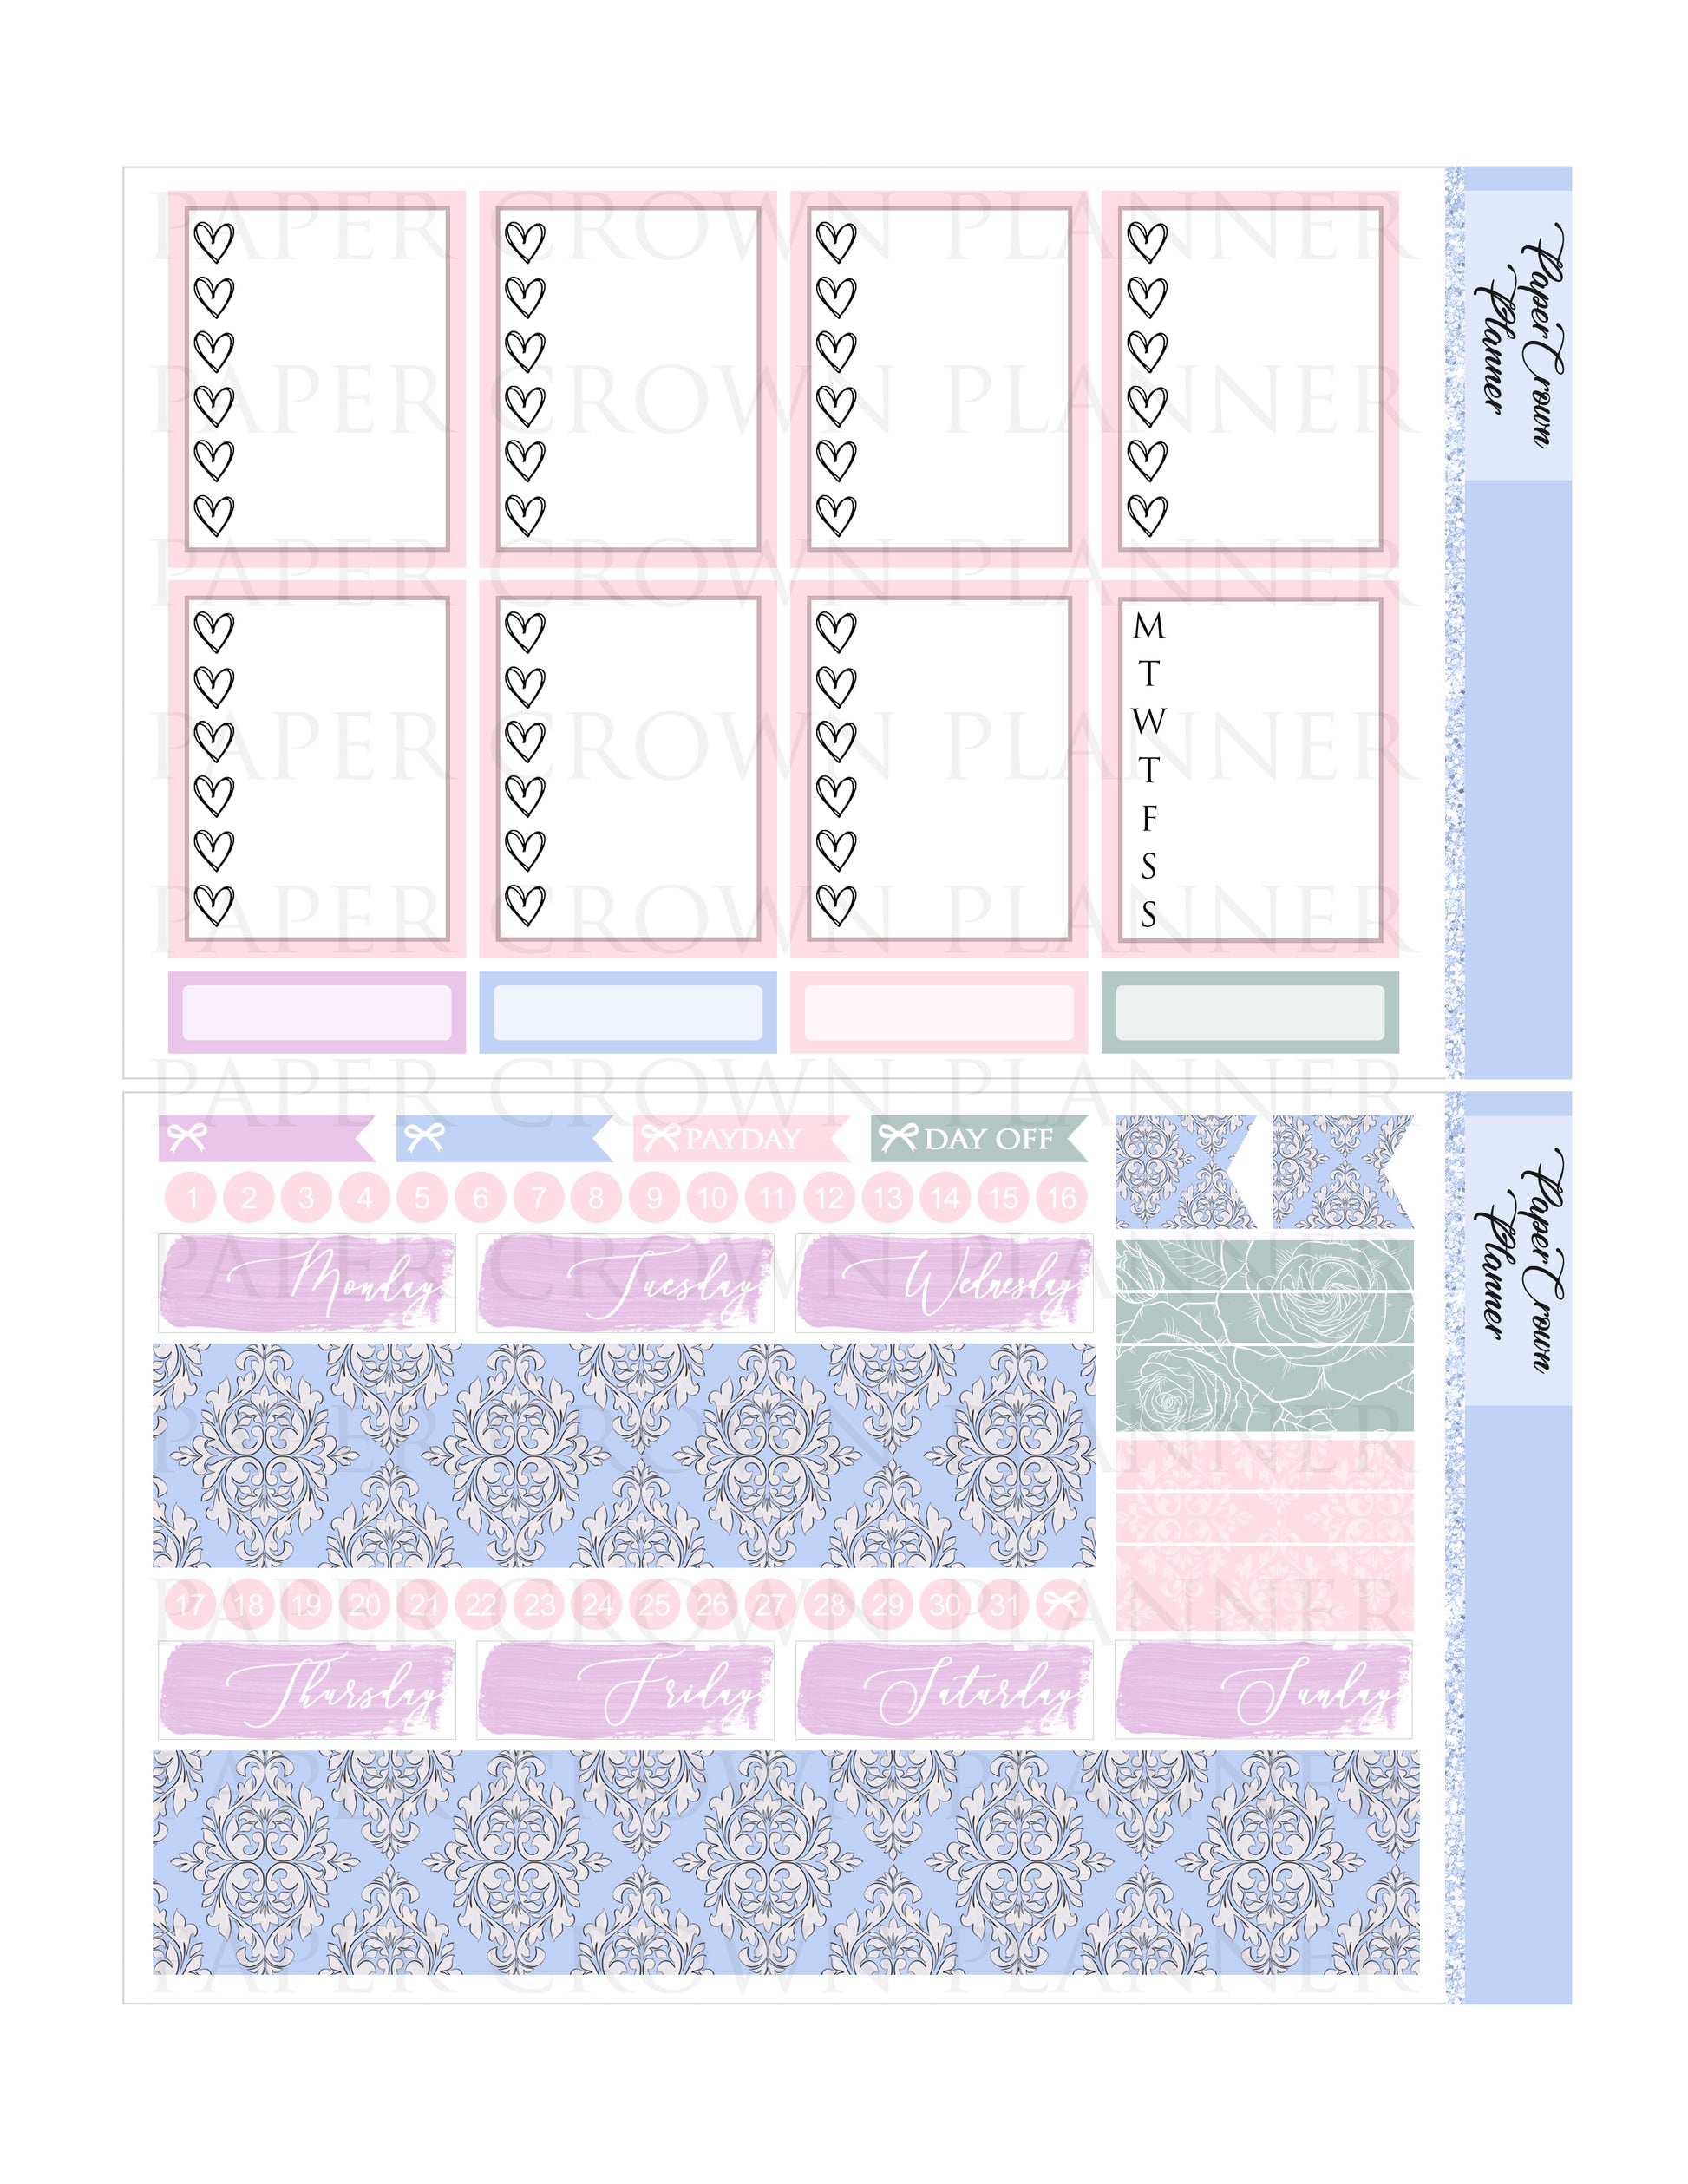 Fashion Printable Planner Stickers: Made to Fit the Classic 